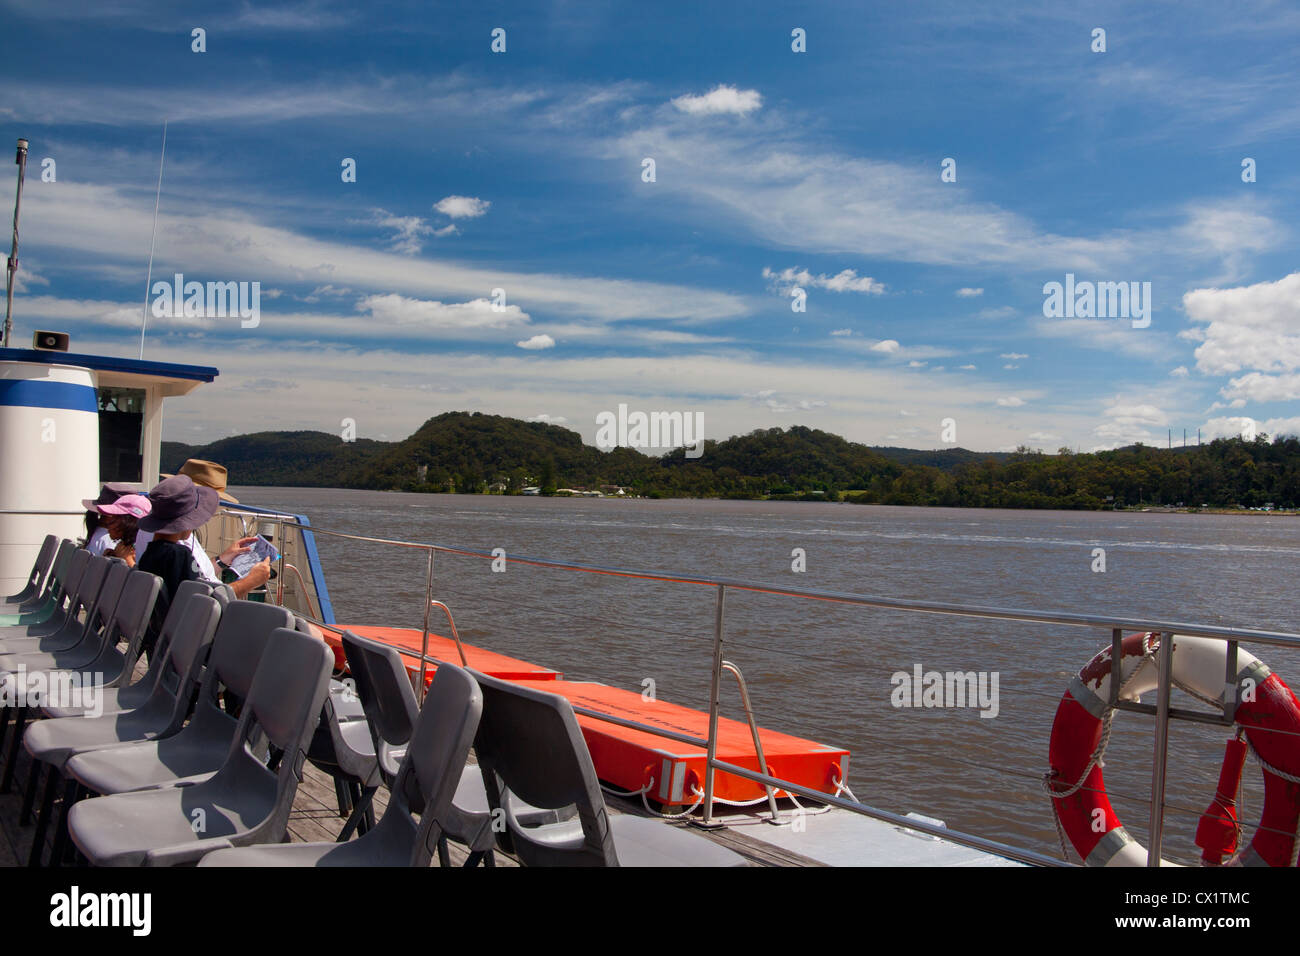 Boat trip on the Hawkesbury Riverboat Postman, with family reading and looking at scenery New South Wales (NSW) Australia Stock Photo